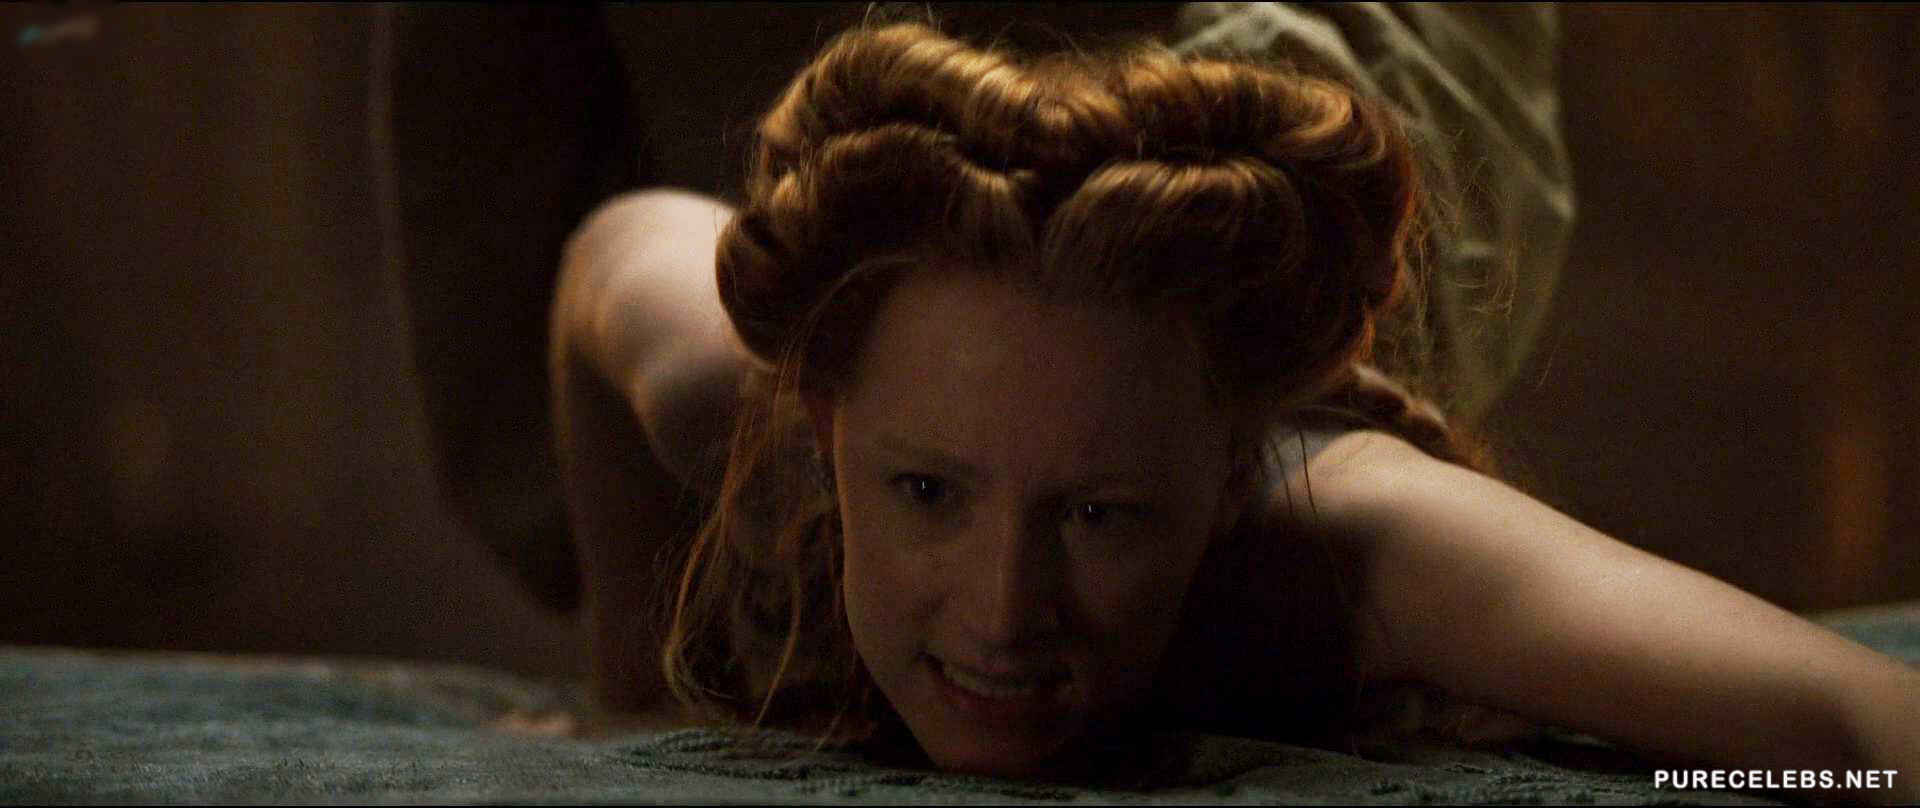 Saoirse Ronan plays Mary, the queen of Scots and she takes a very sexy bath...